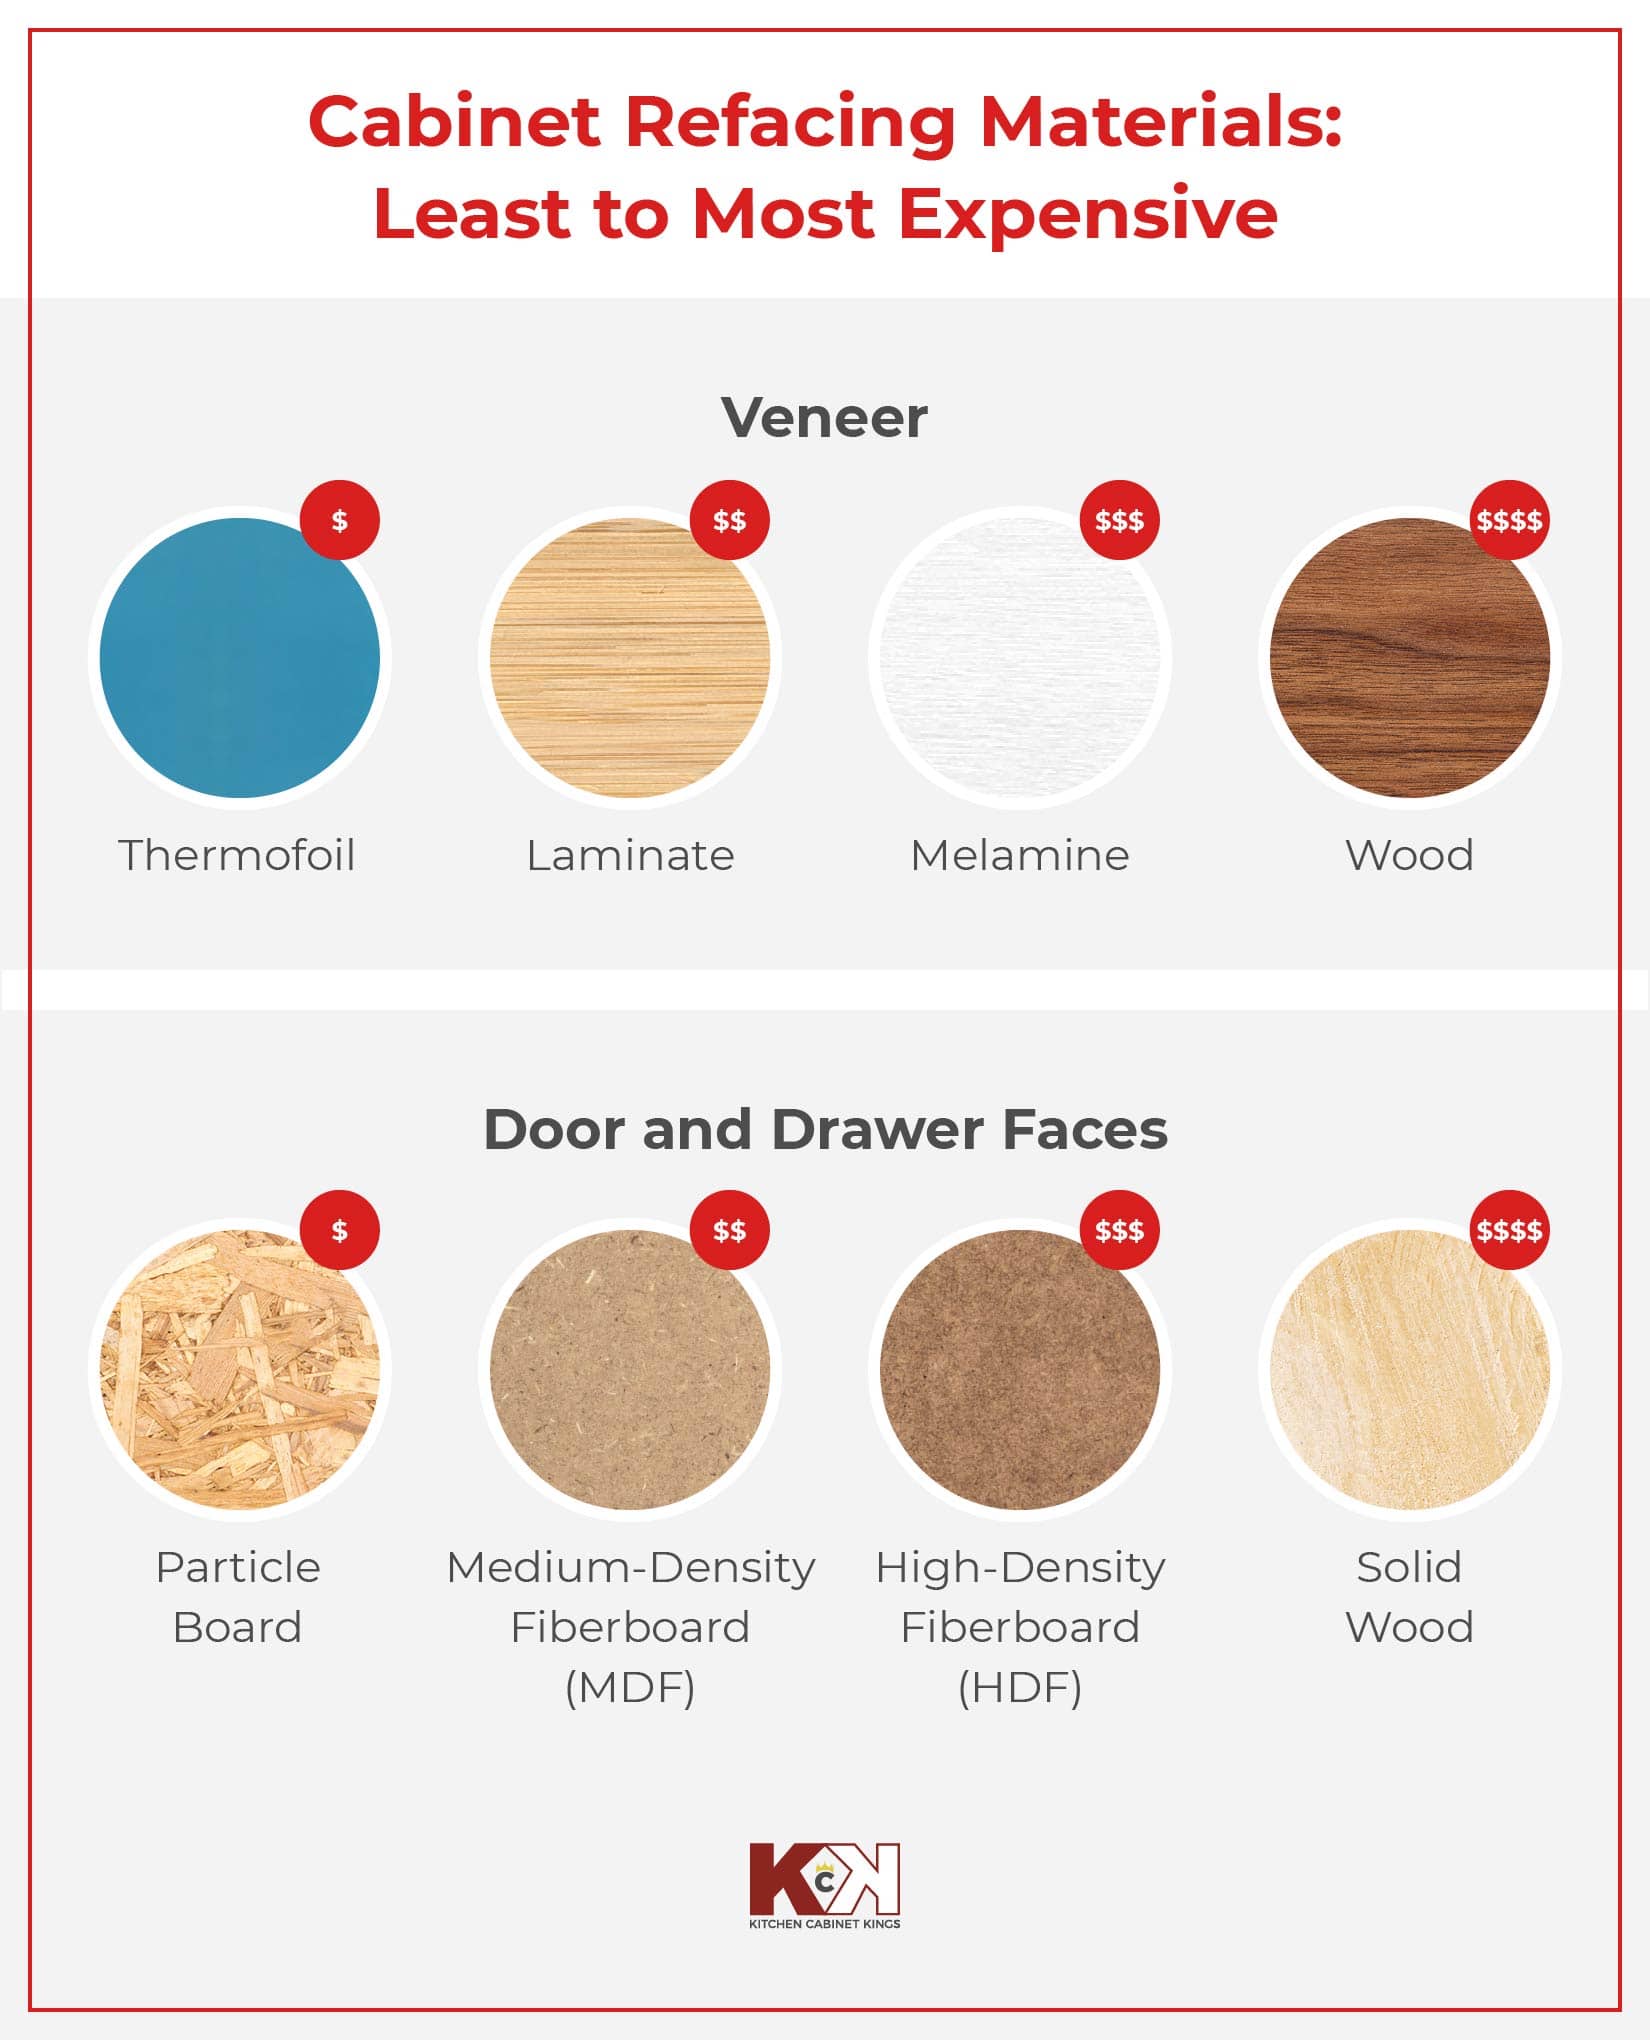 Image of cabinet refacing materials listed from most to least expensive.